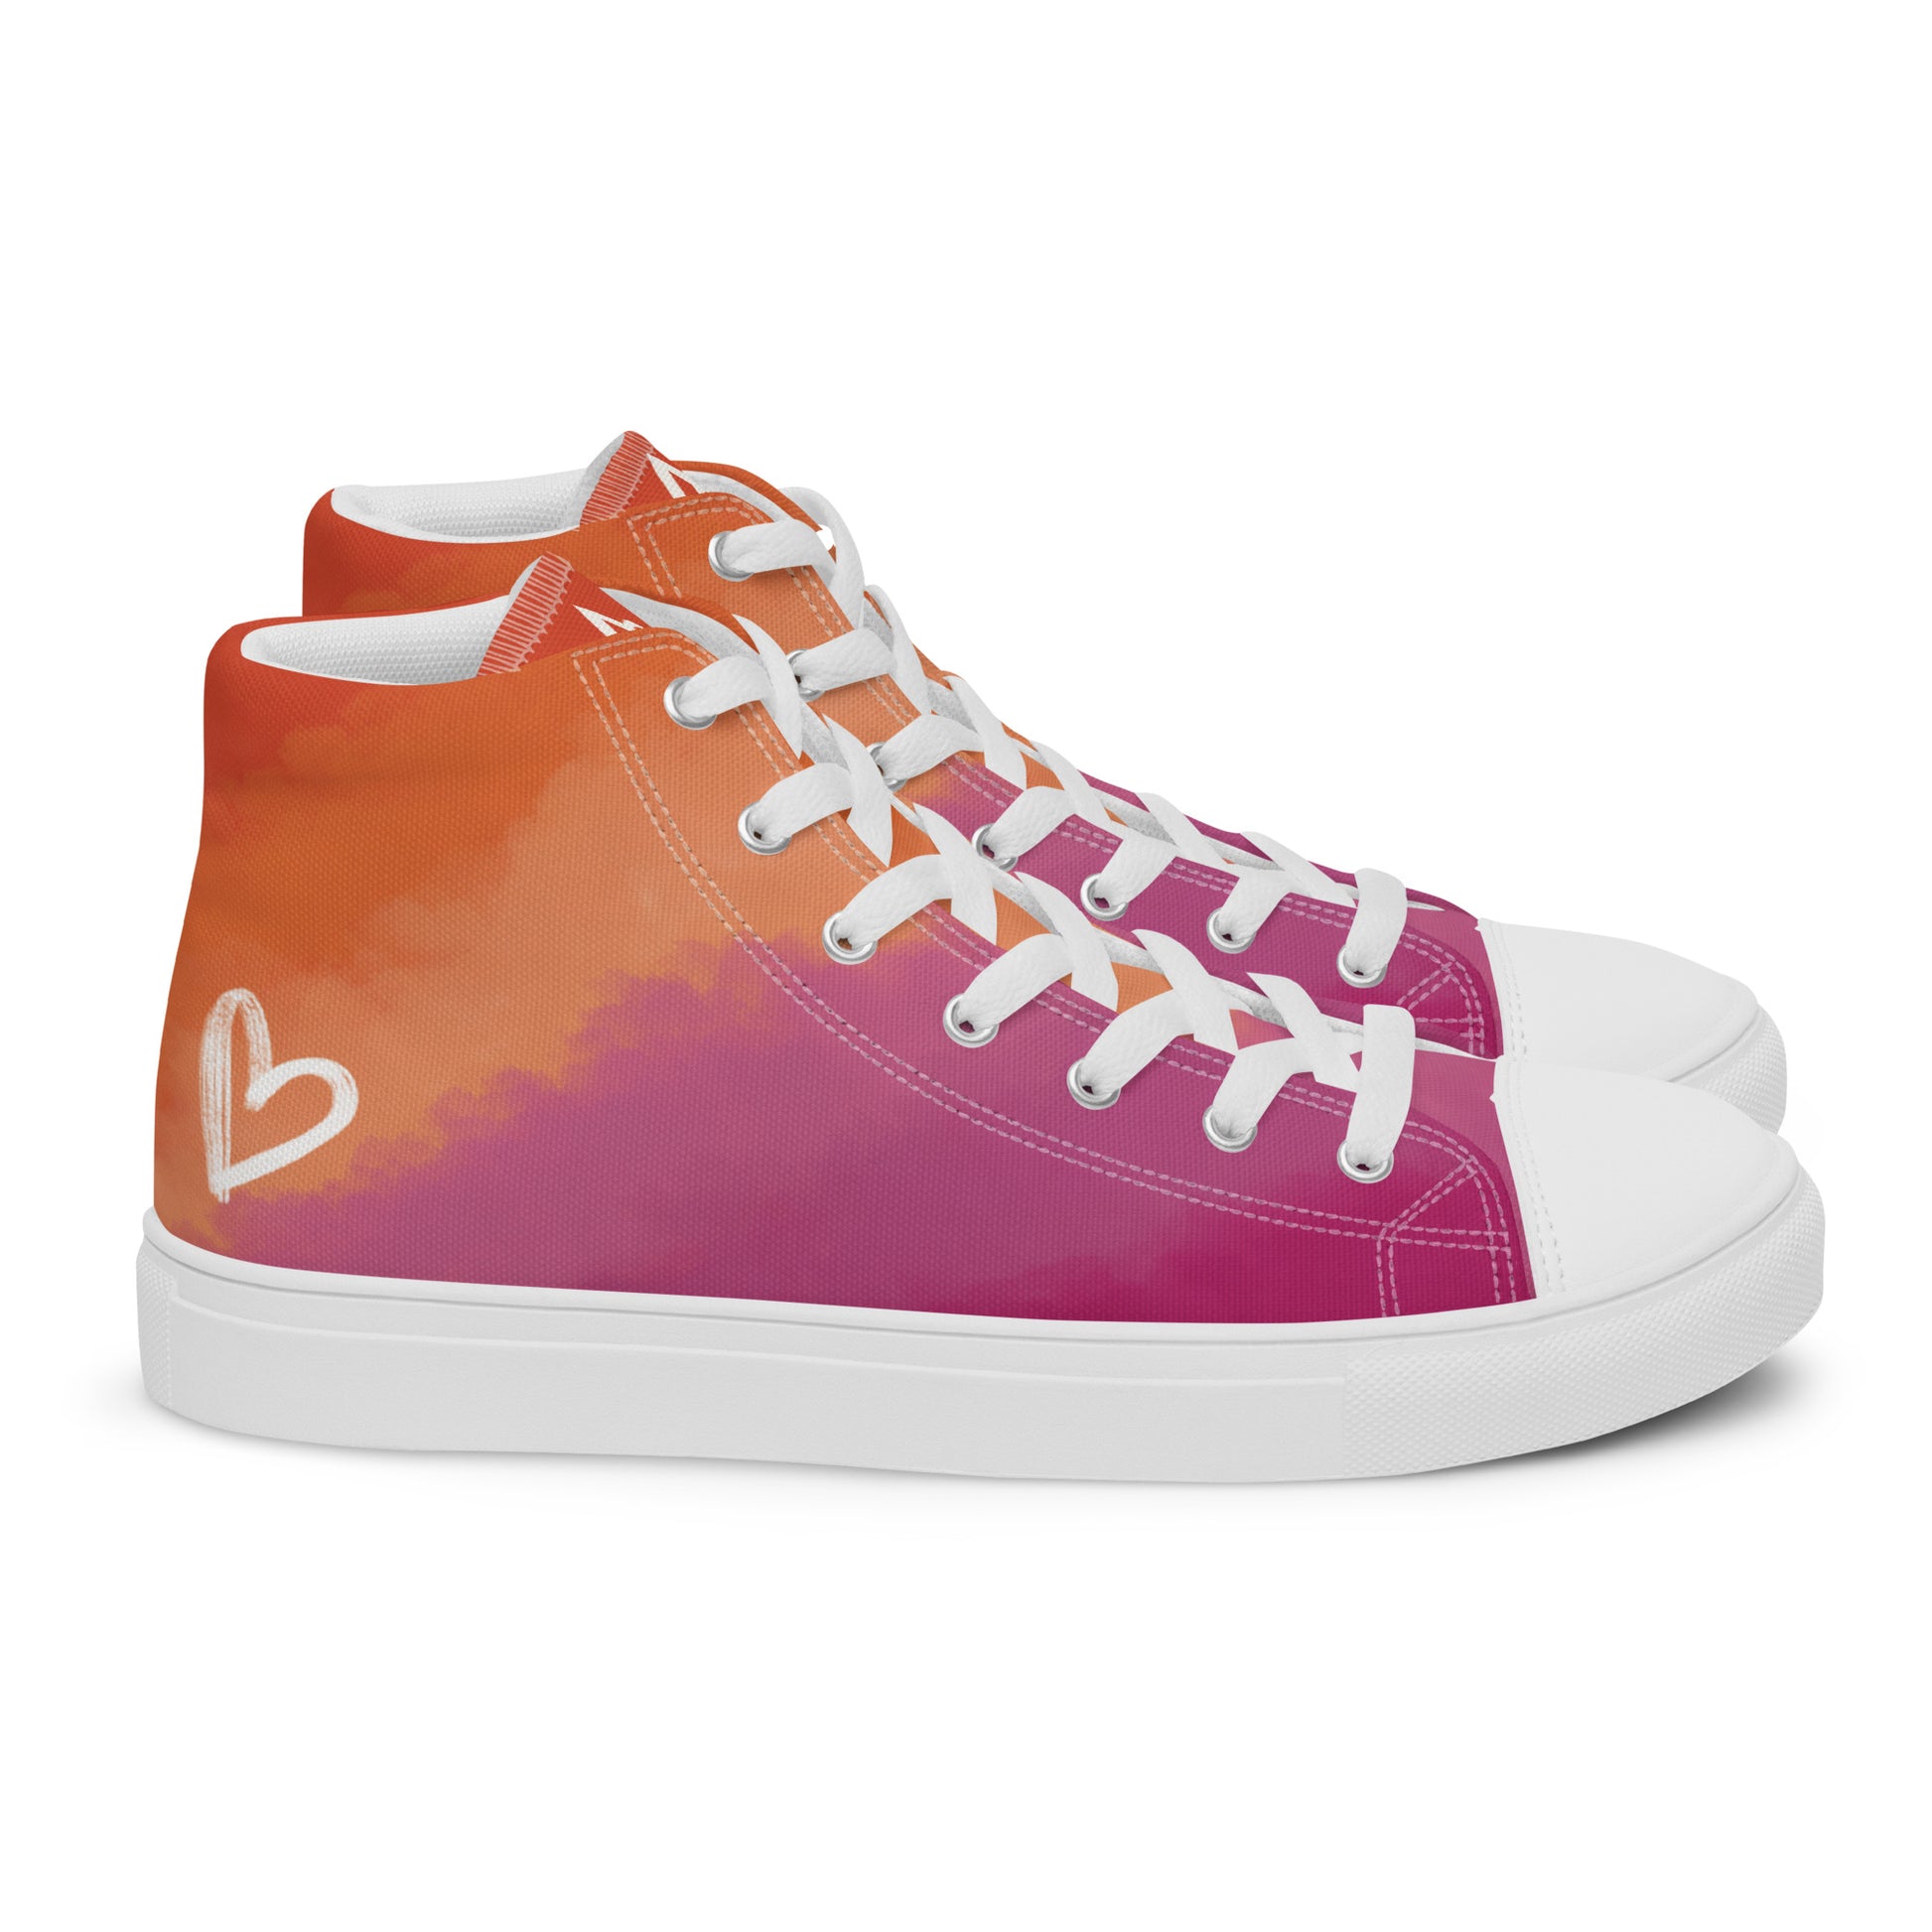 Right view: A pair of high top shoes with cloud layers in the lesbian flag colors, a white heart on the heel, and the Aras Sivad Studio logo on the tongue.